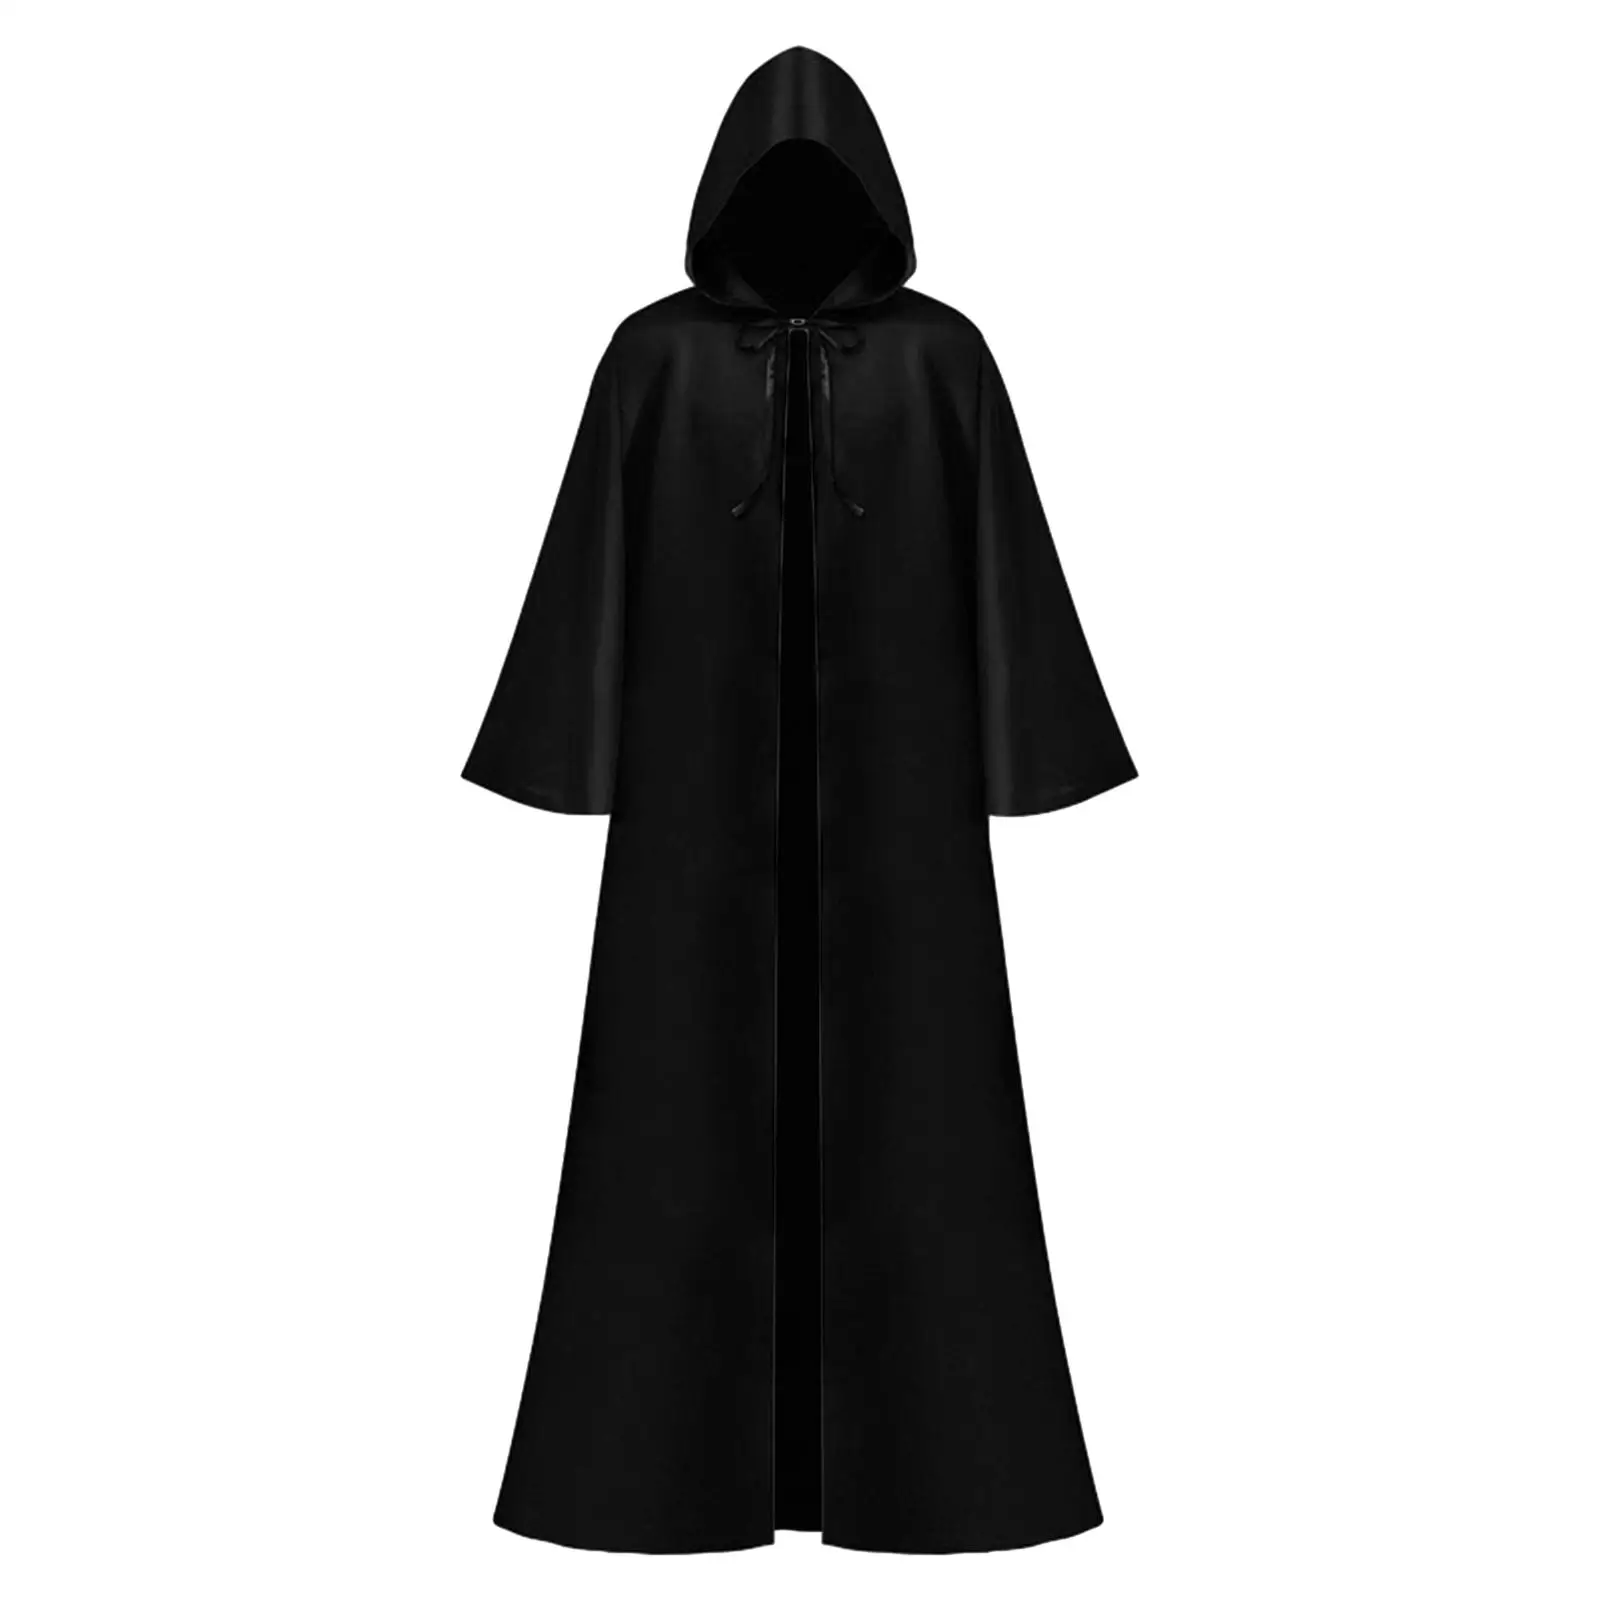 Halloween Hooded Cloak Dress up Medieval Devil Outfit Long Hooded Cloak for Club Easter Performance Fancy Dress Party Punk Party